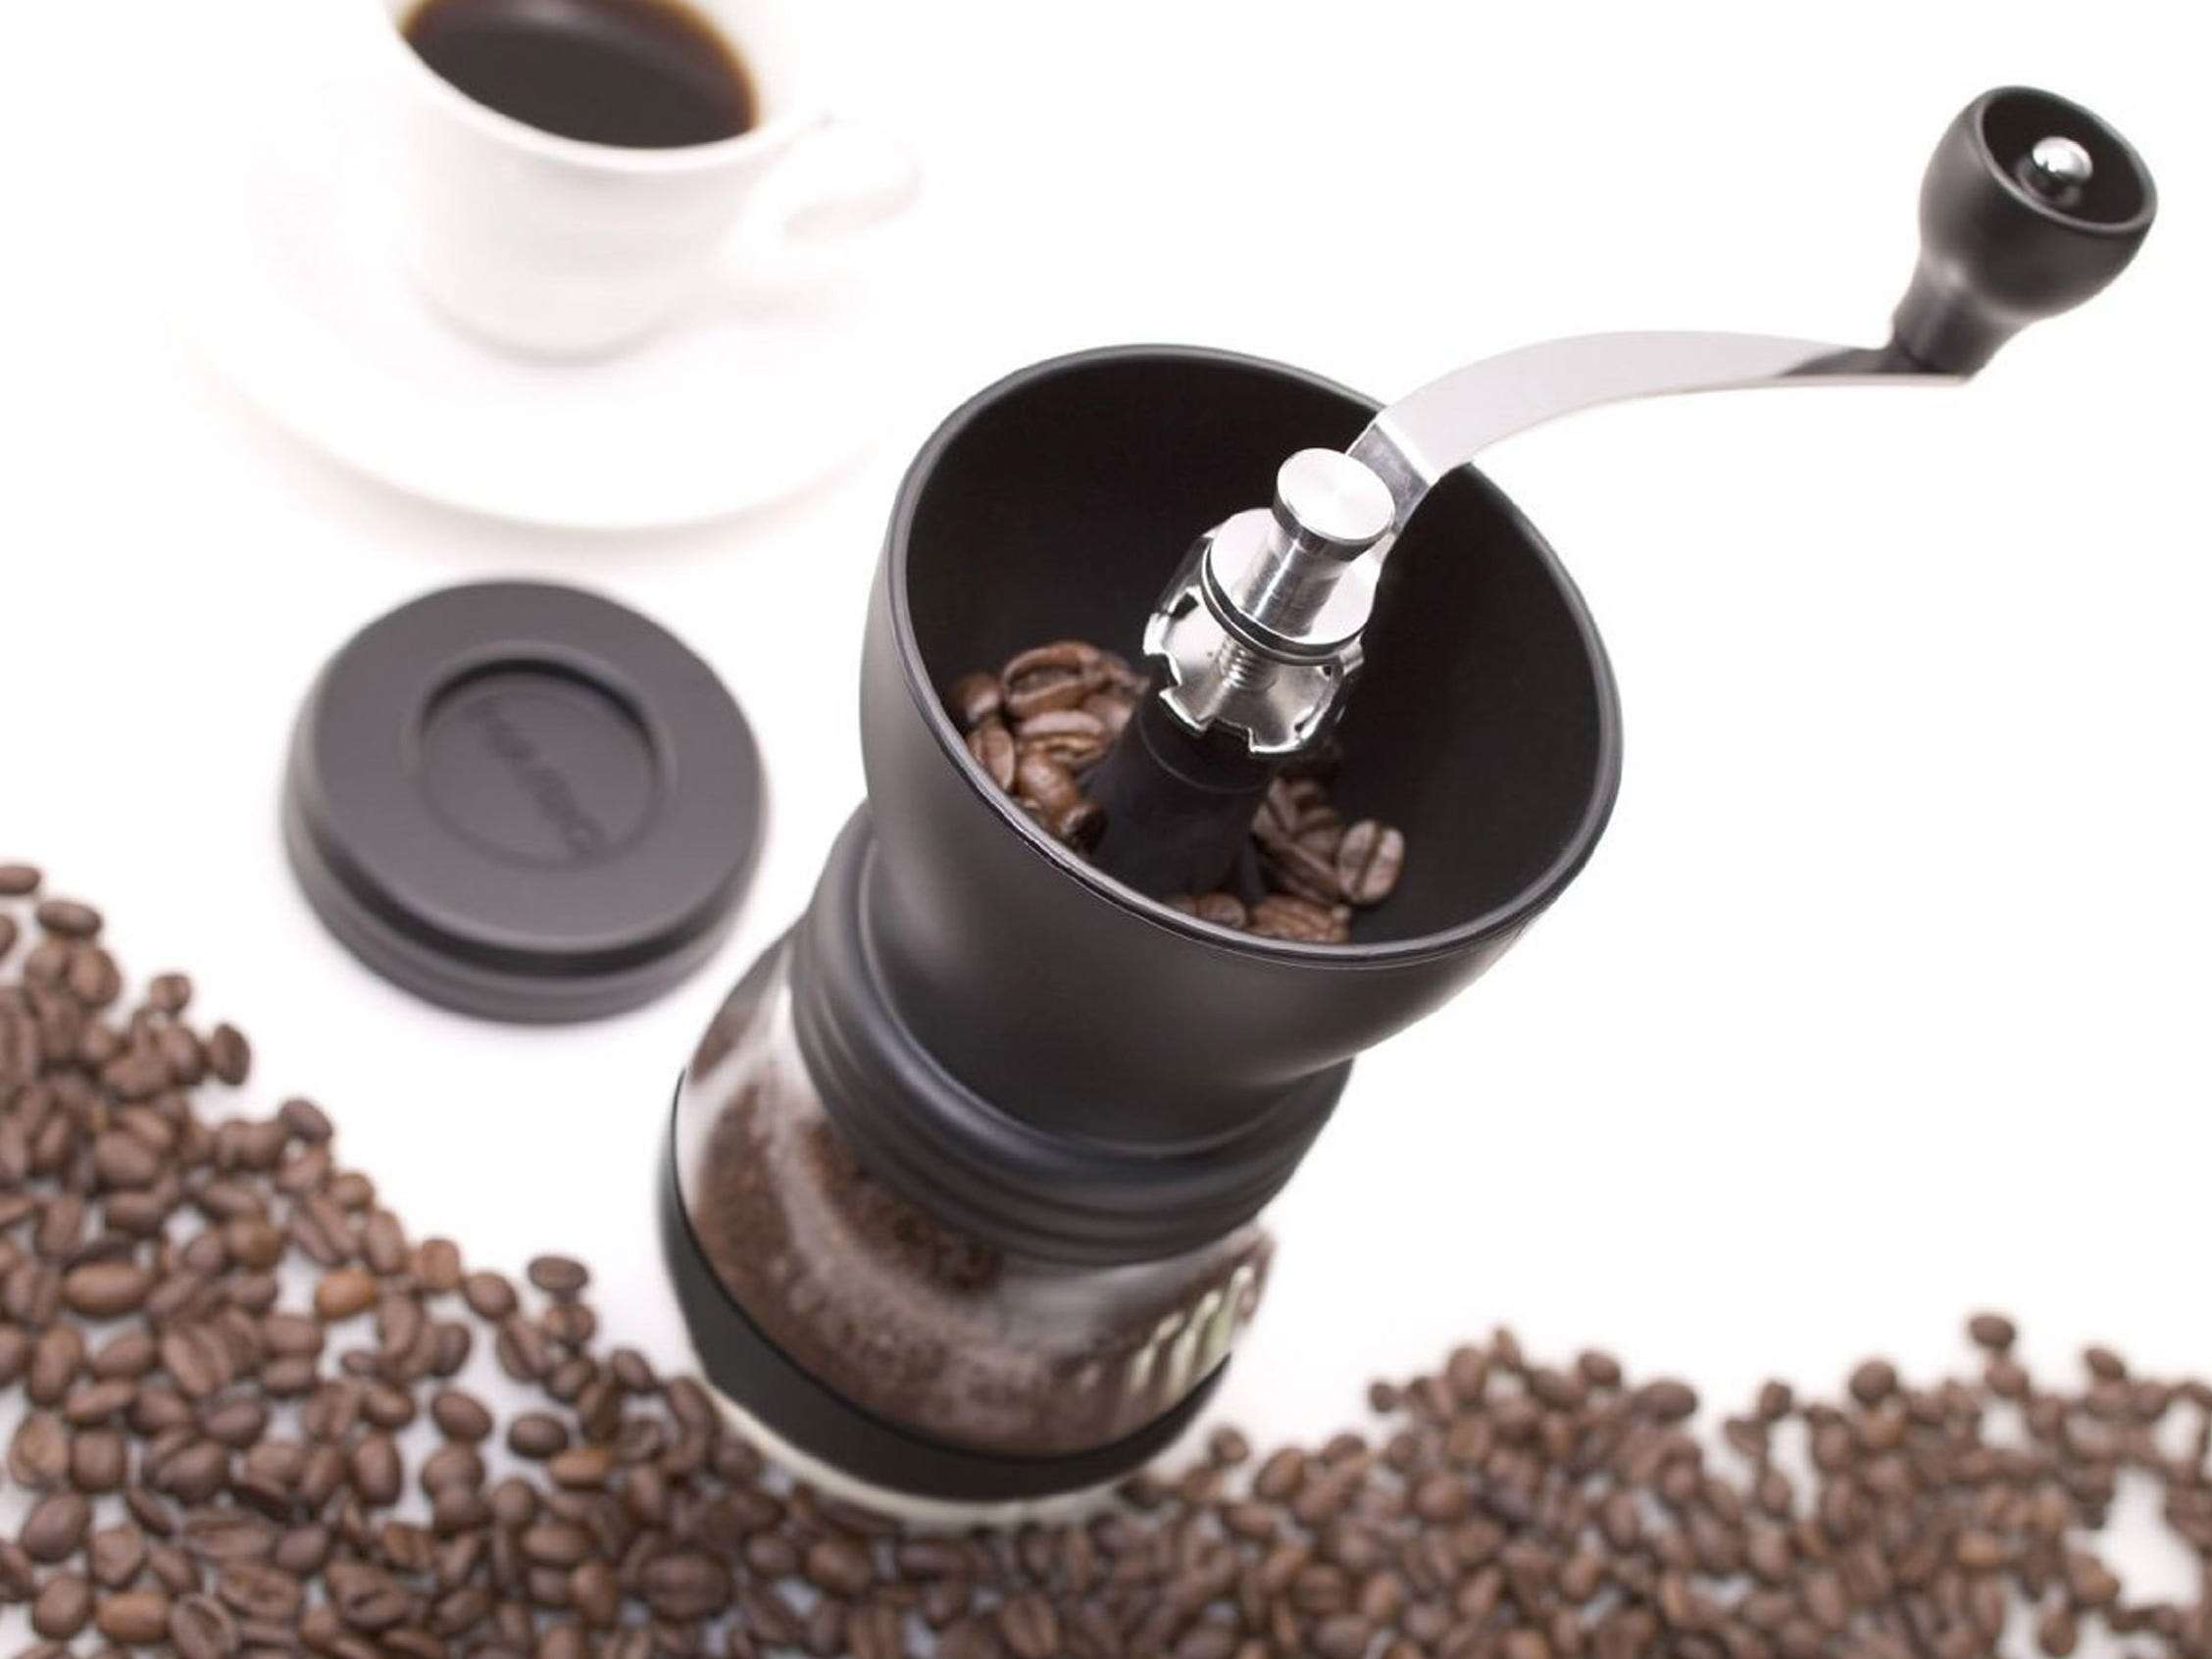 Secura Electric Coffee And Spice Grinder Review, Genuine Review